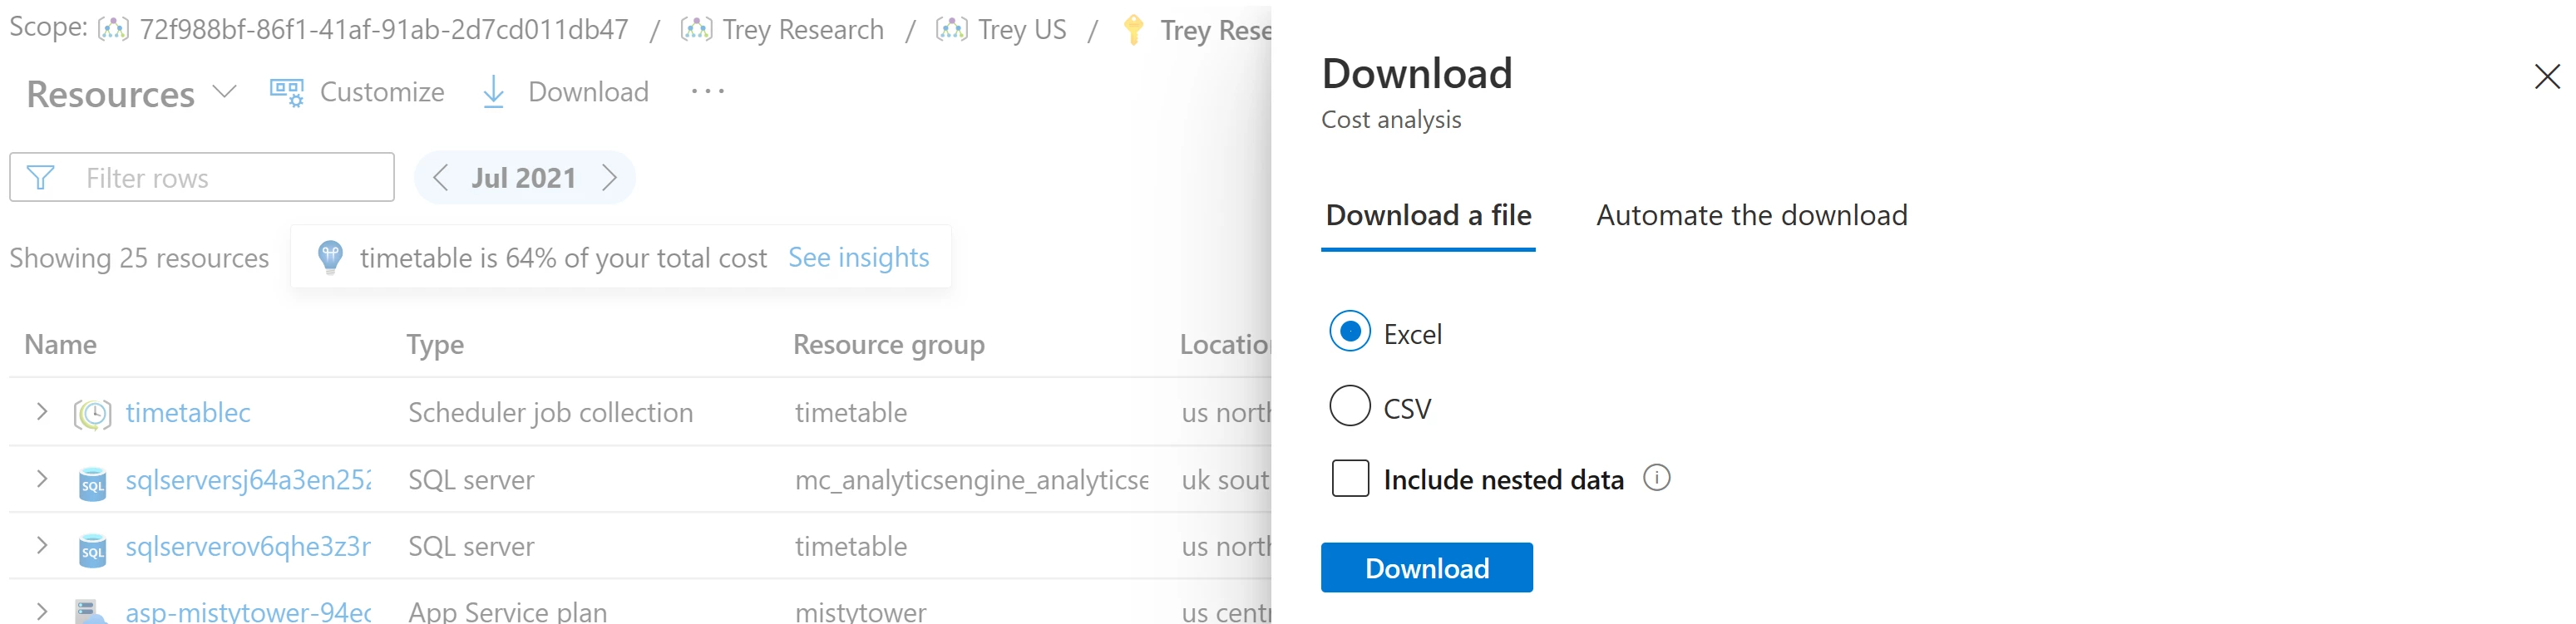 Download a file option available from the cost analysis preview